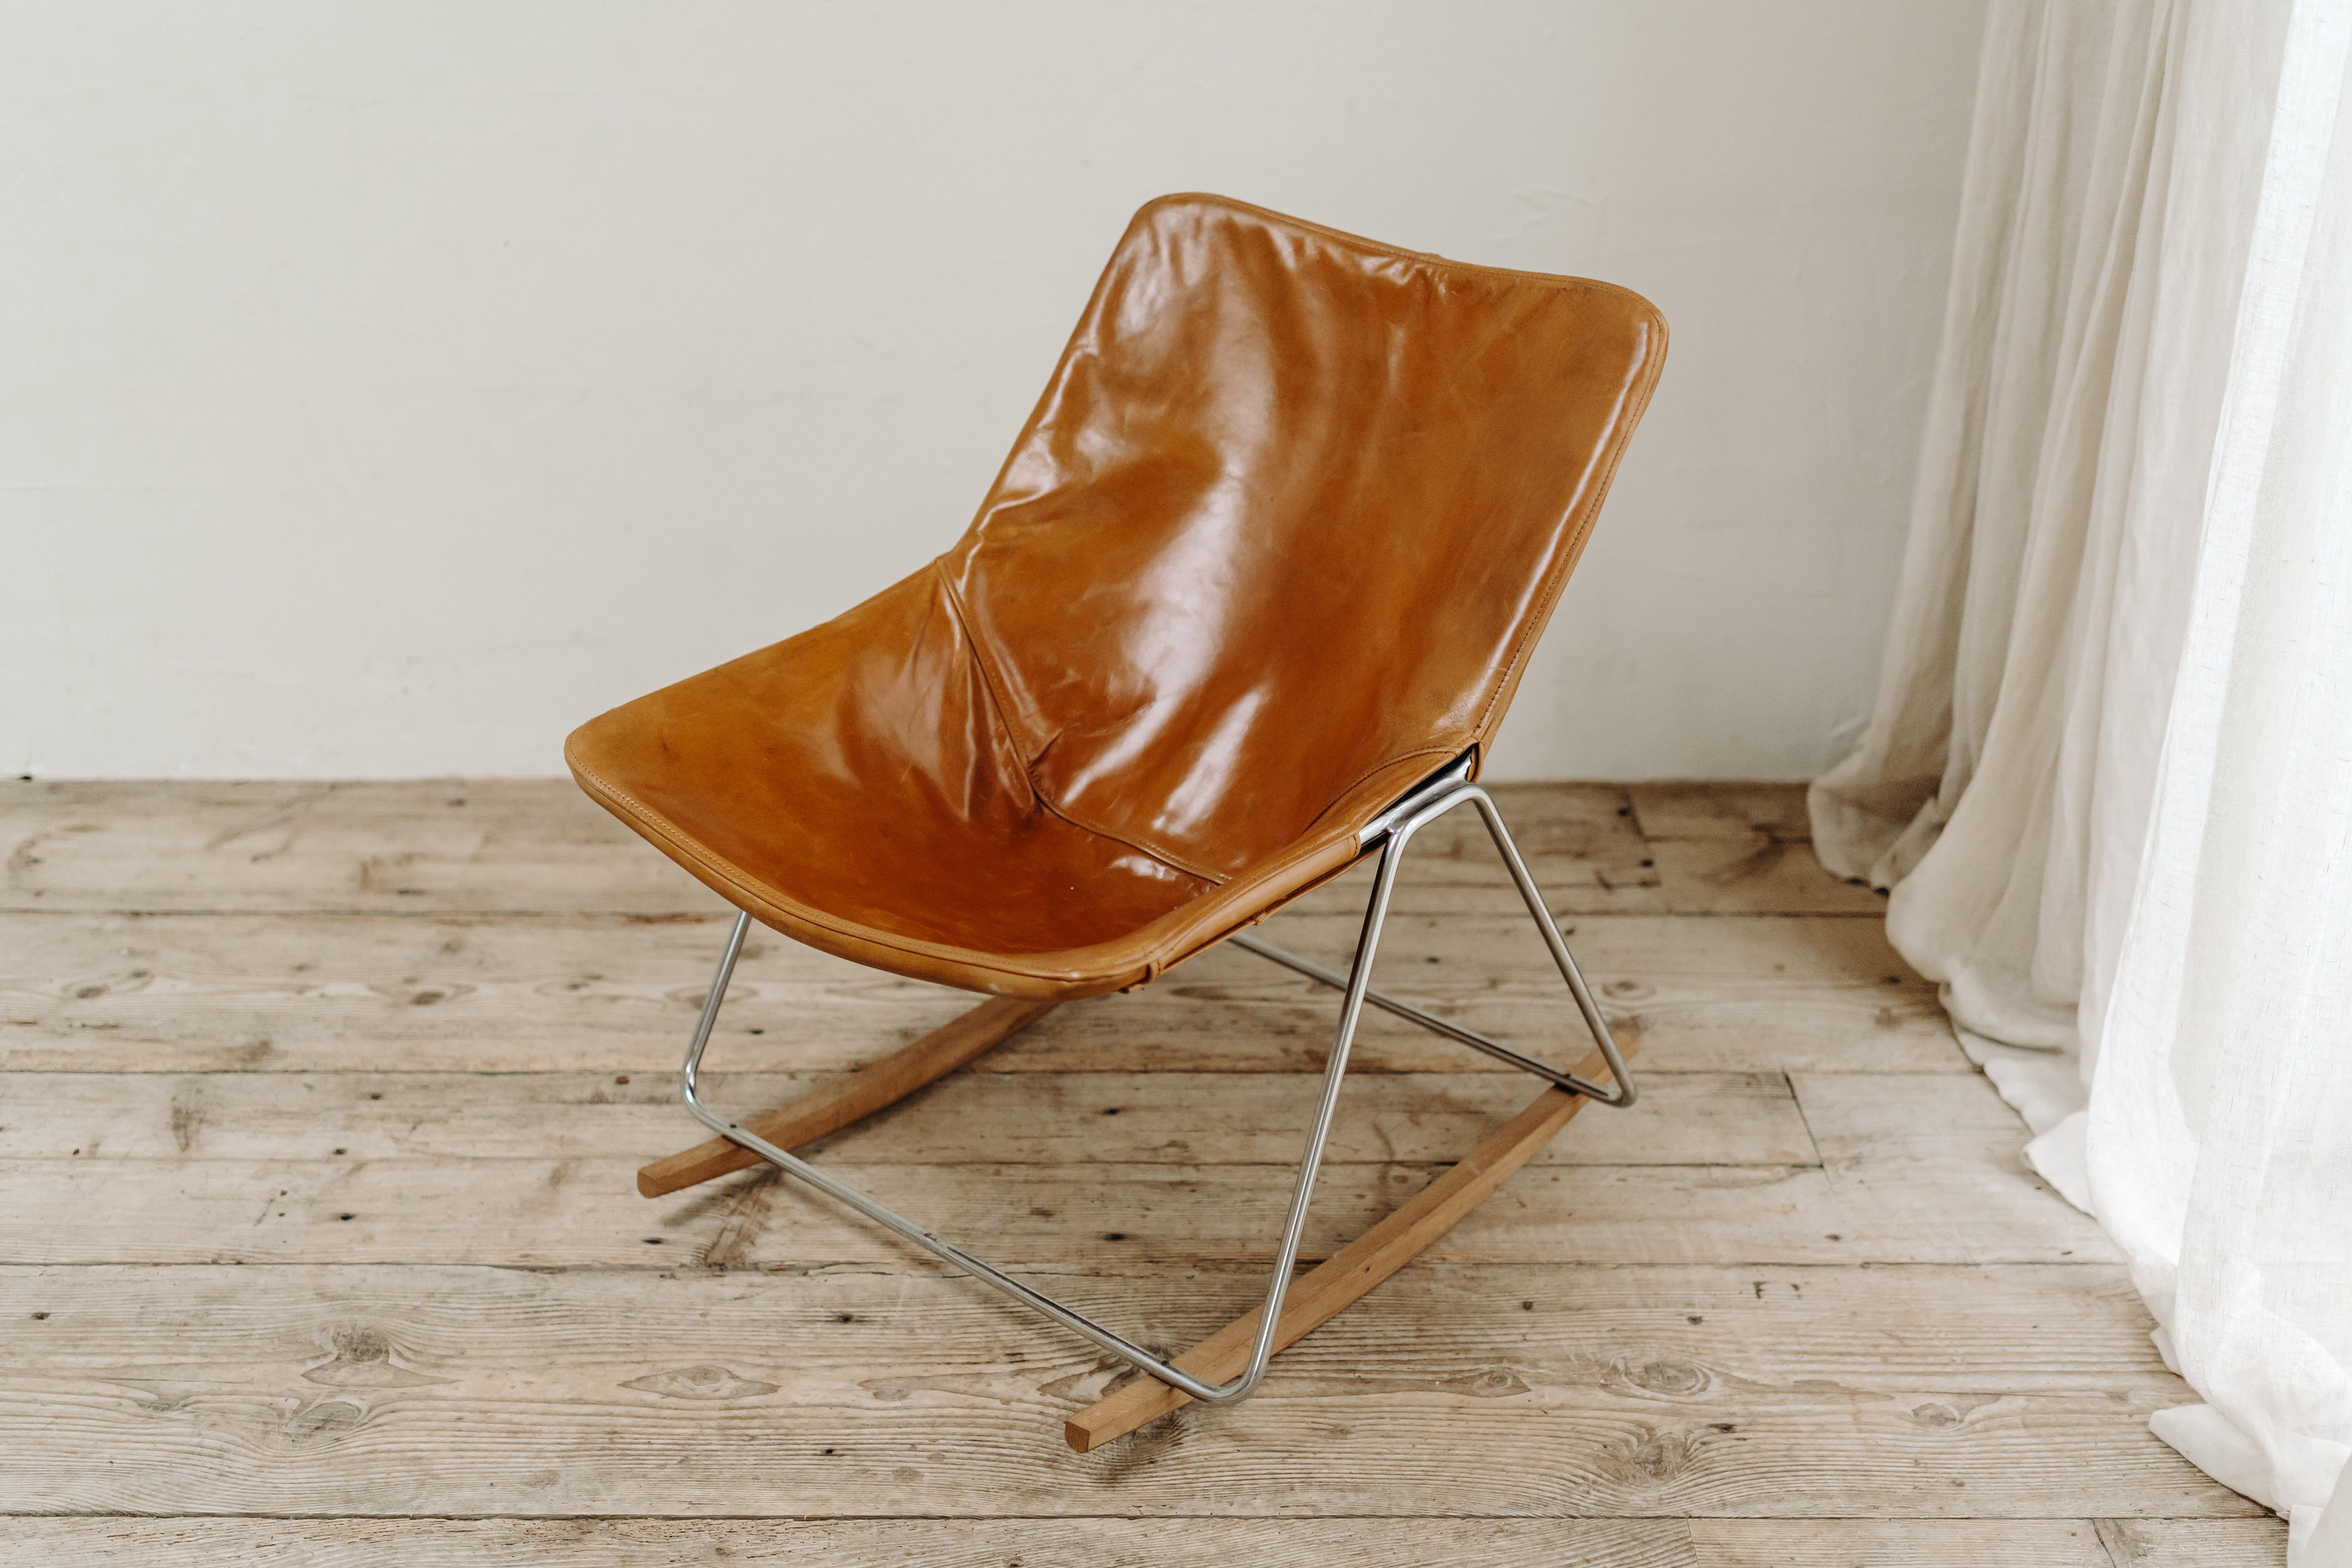 A rare G1 leather rocking chair by Pierre Guariche from Farnce, designed in the 1950's for Airborne. The simplistic and modern design consist of a tubular steel frame with a seating of congnac leather. Underneath two wooden feet to make this a